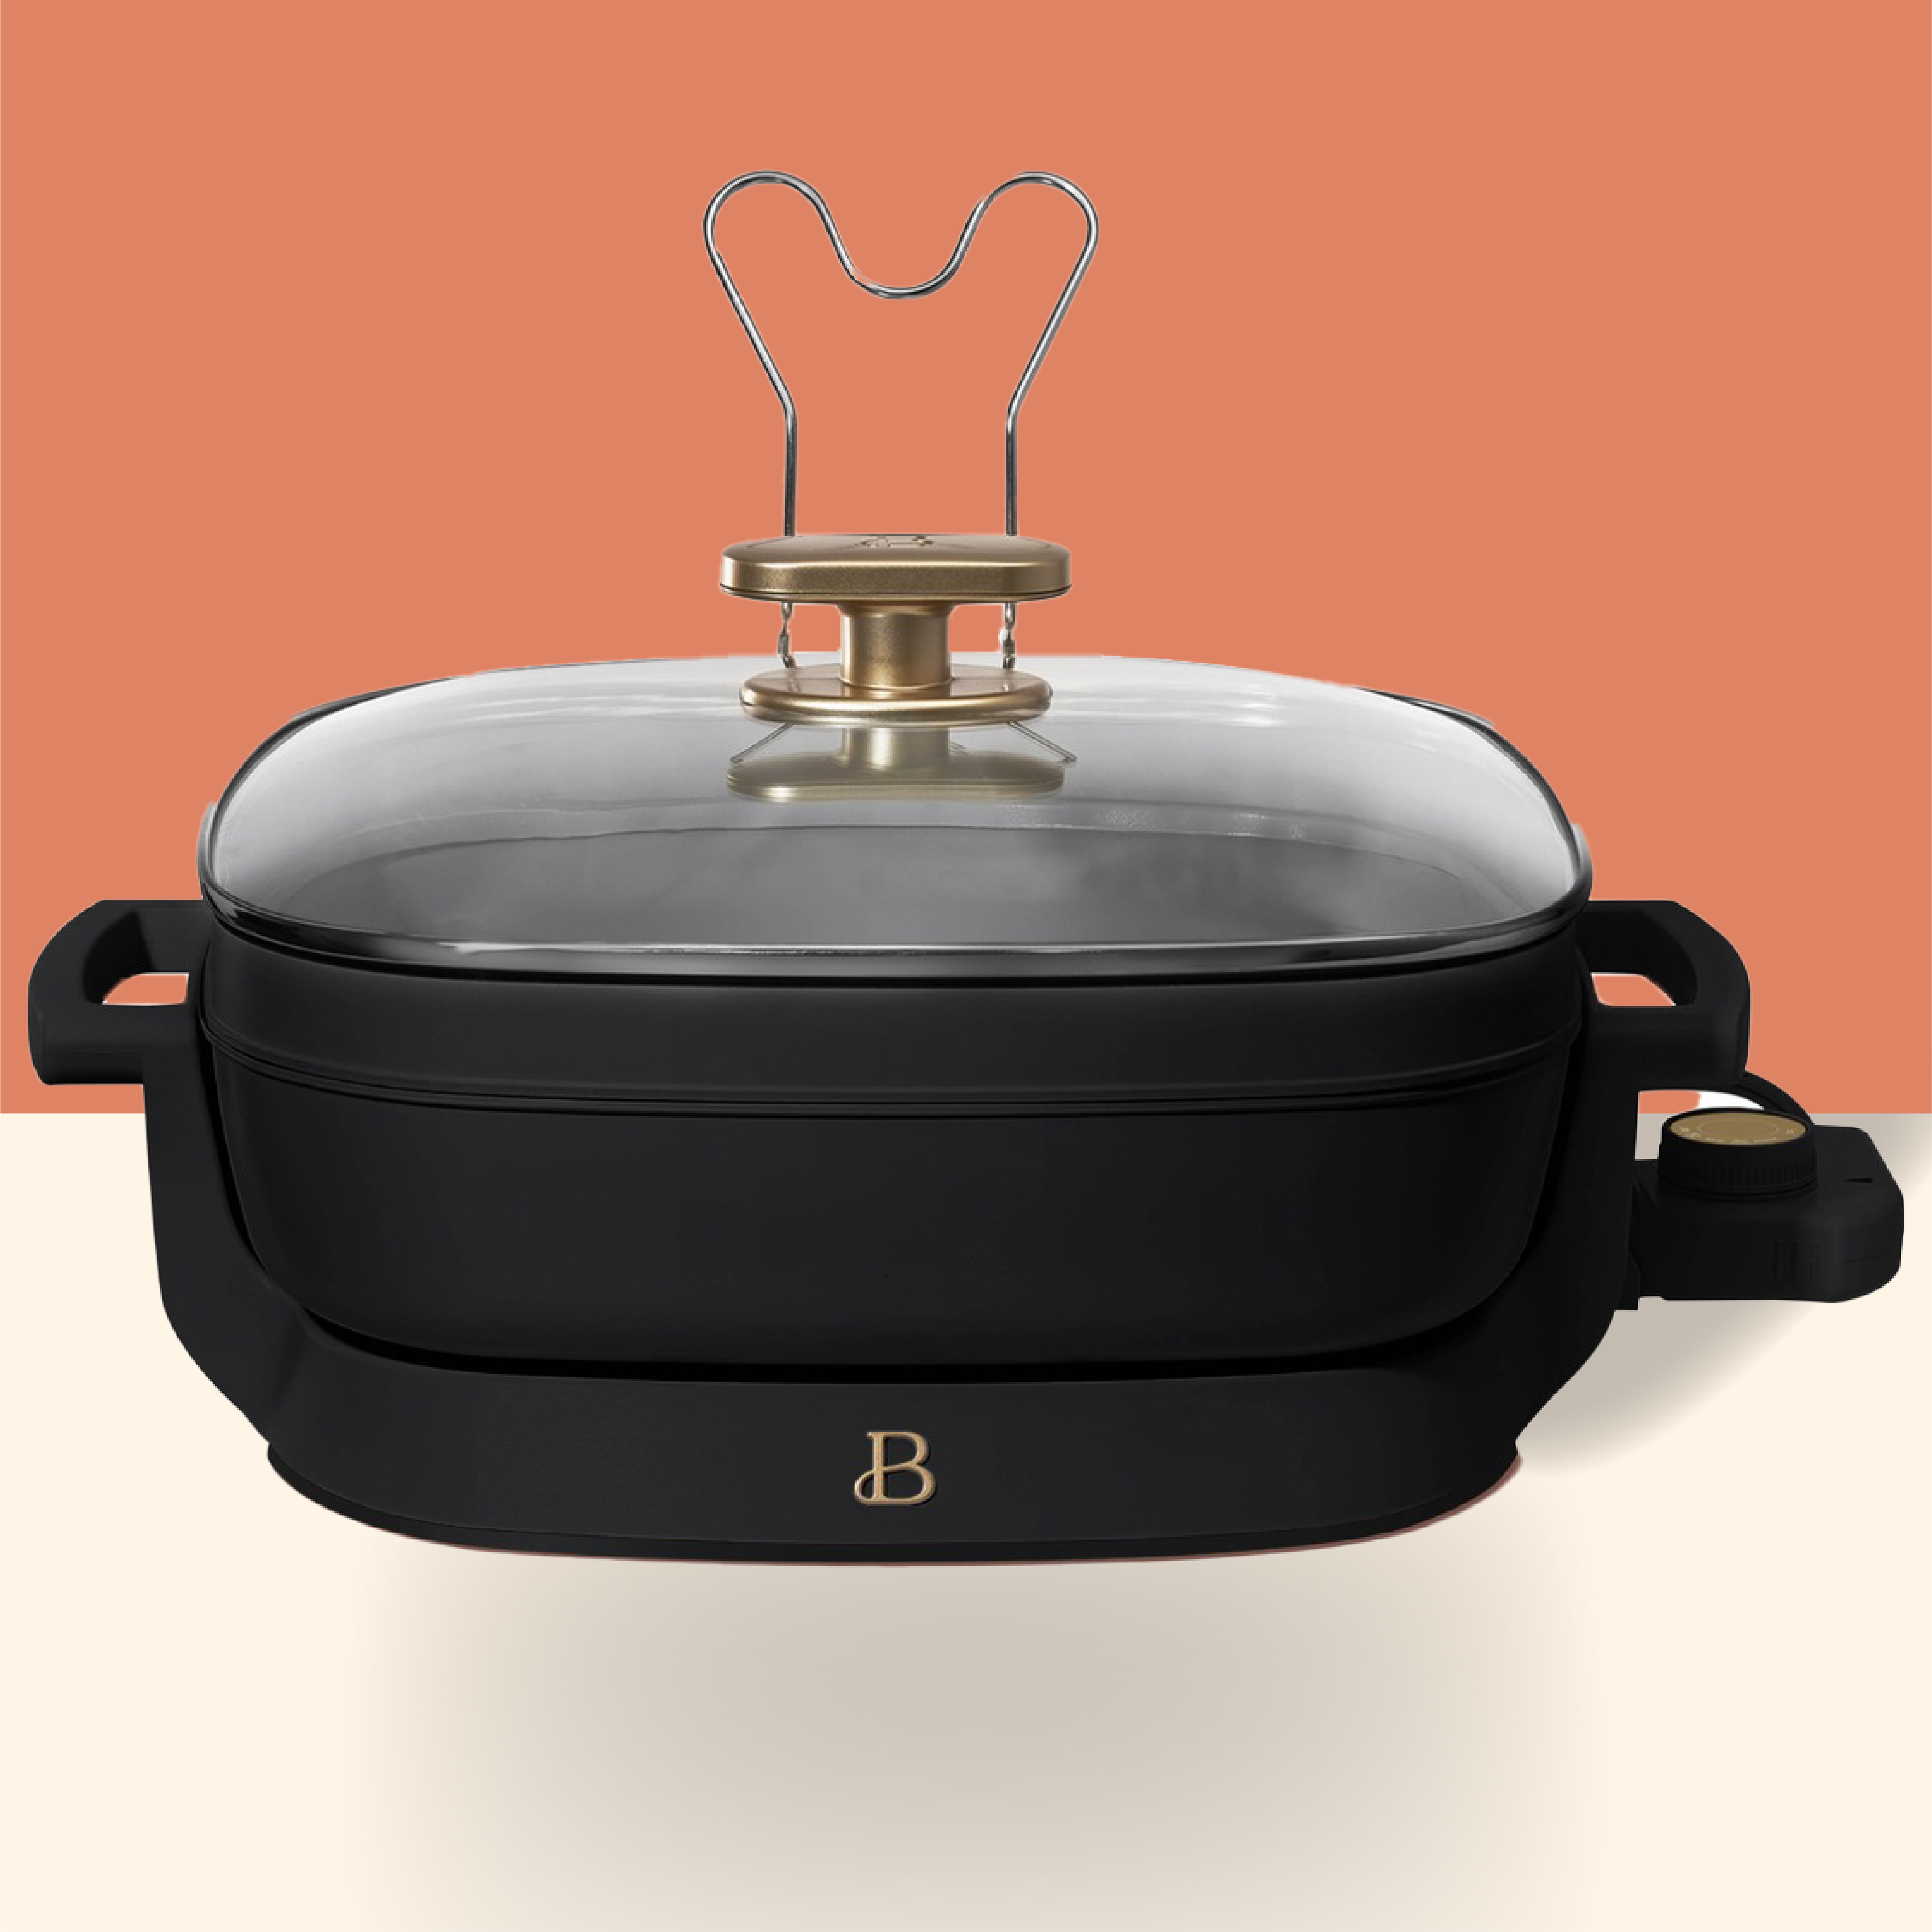 Beautiful 8QT Slow Cooker, Oyster Grey by Drew Barrymore 